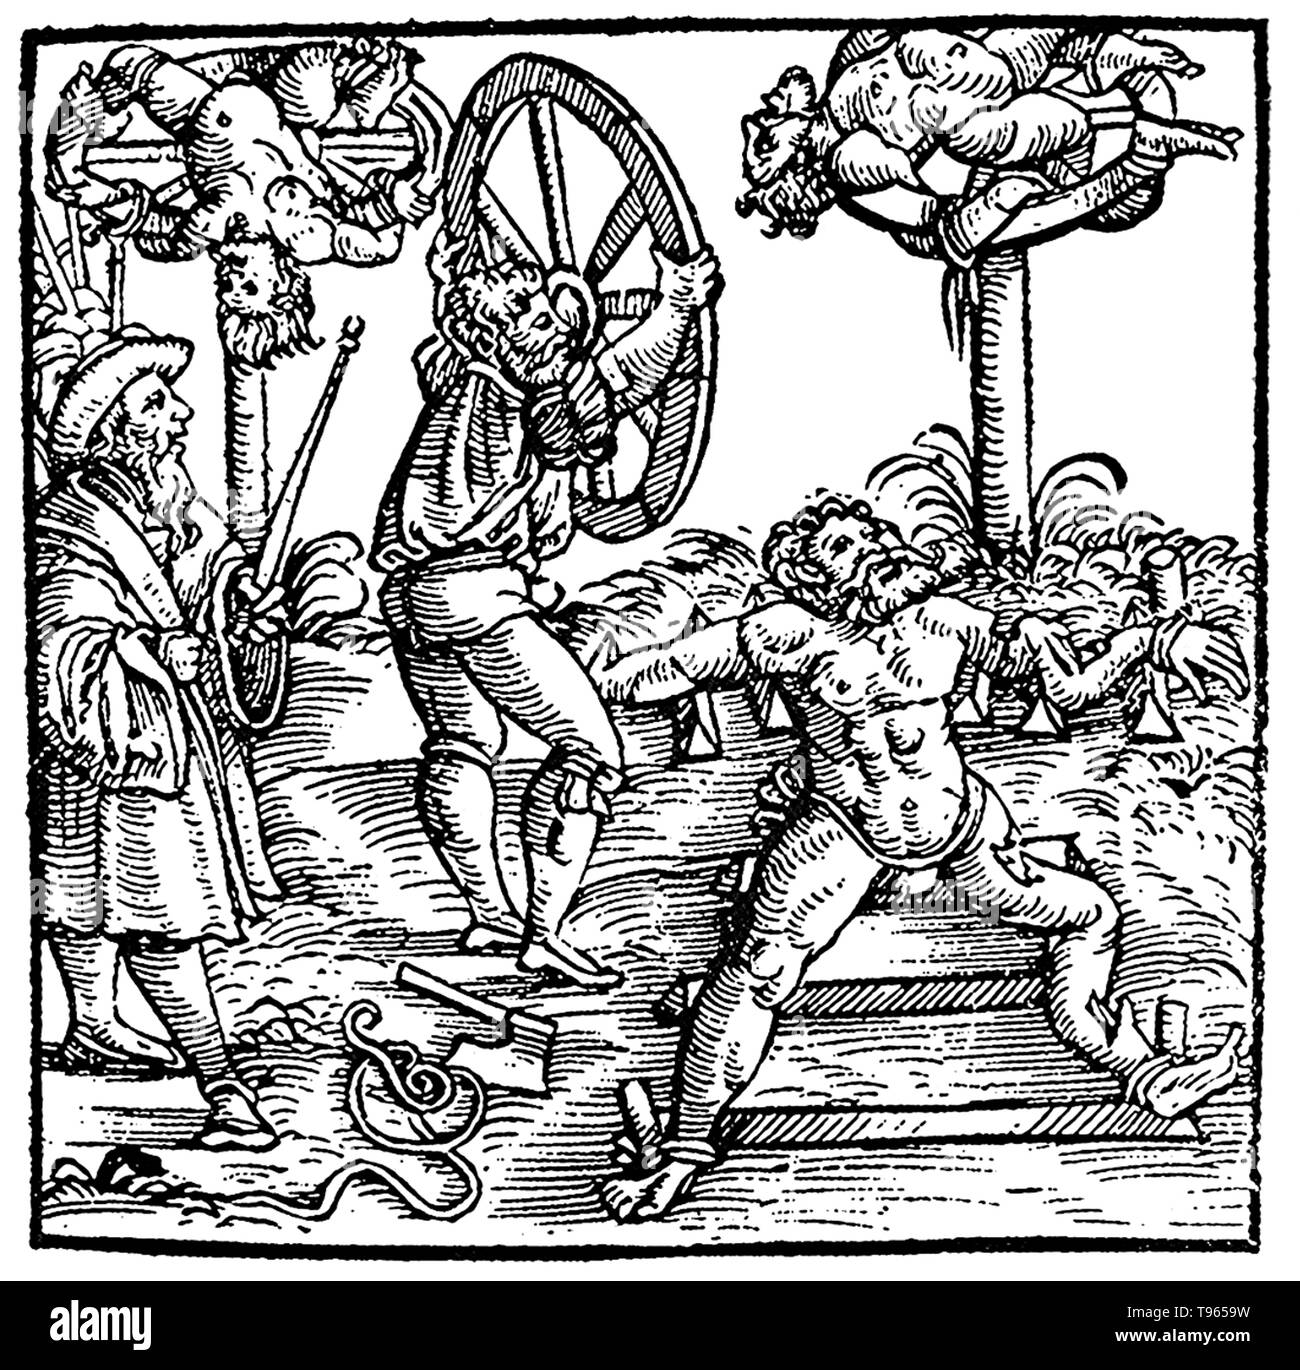 The breaking wheel, also known as the Catherine wheel or simply the wheel, was a torture device used for capital punishment from antiquity into early modern times for public execution by breaking the criminal's bones/bludgeoning him to death. As a form of execution, it was used from classical times into the 18th century; as a form of post mortem punishment of the criminal, the wheel was still in use in 19th century Germany. Stock Photo